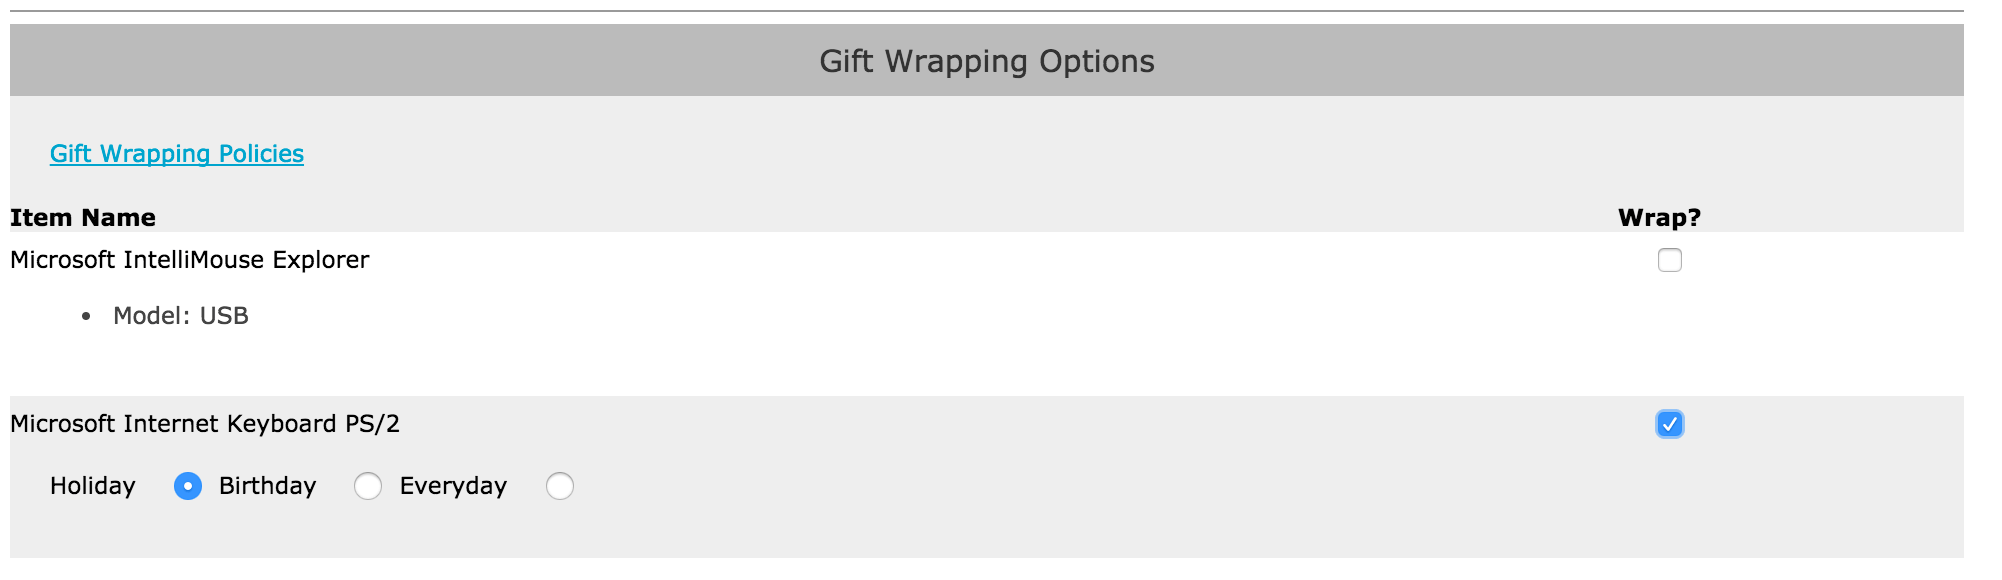 Zen Cart Shipping page text descriptions of wrap styles